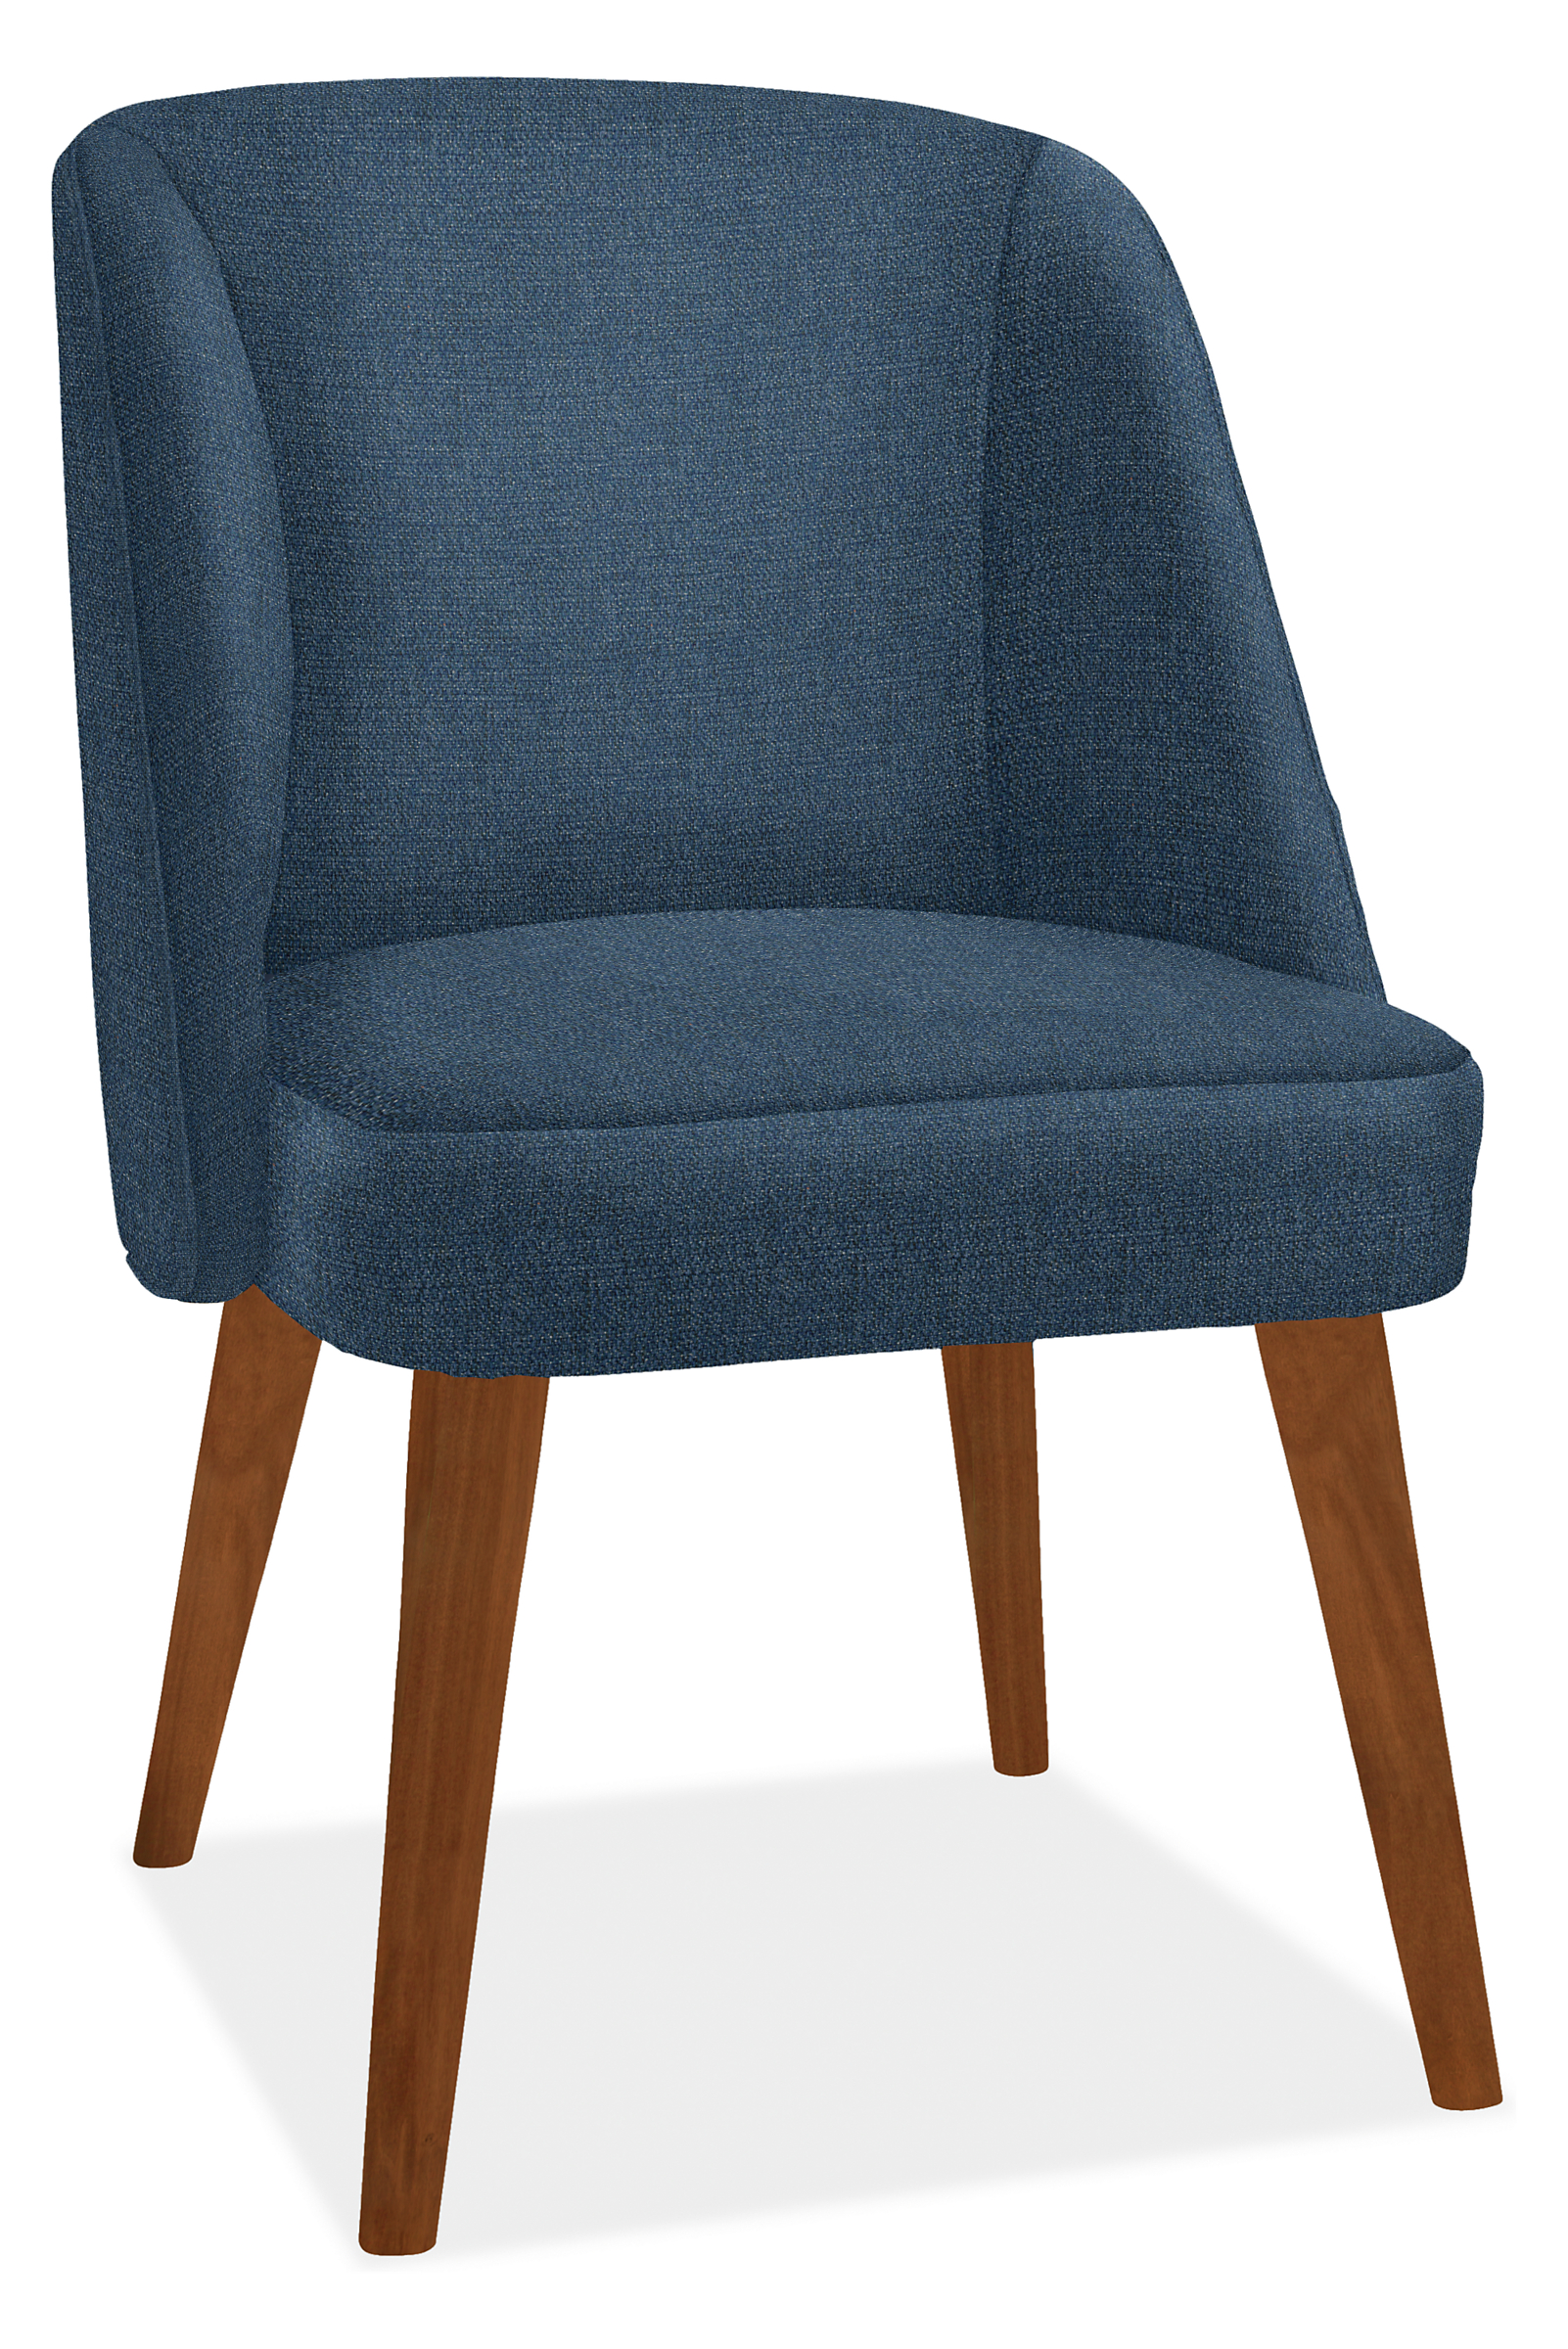 Cora Chair in Tepic Navy with Mocha Legs